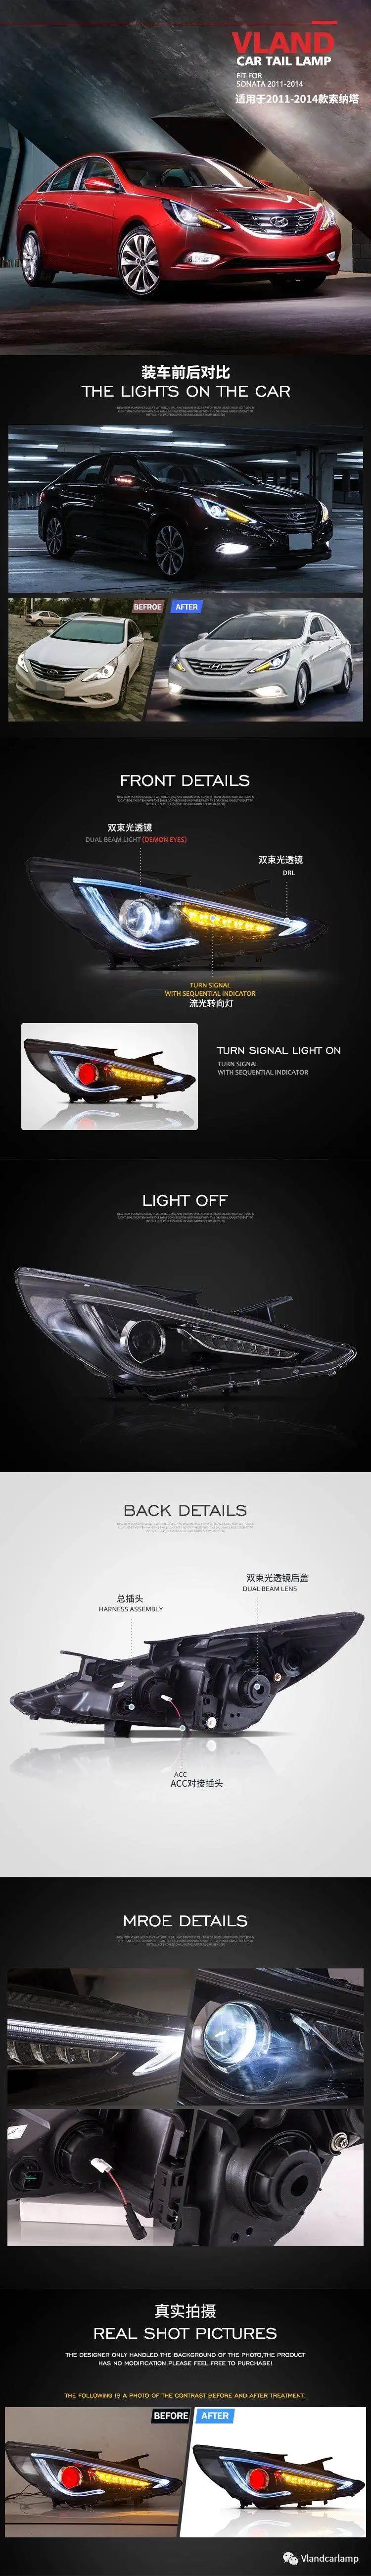 Vland factory accessory for car LED lights for Sonata headlight fit for 2011-2018 with demon eyes + LED light bar